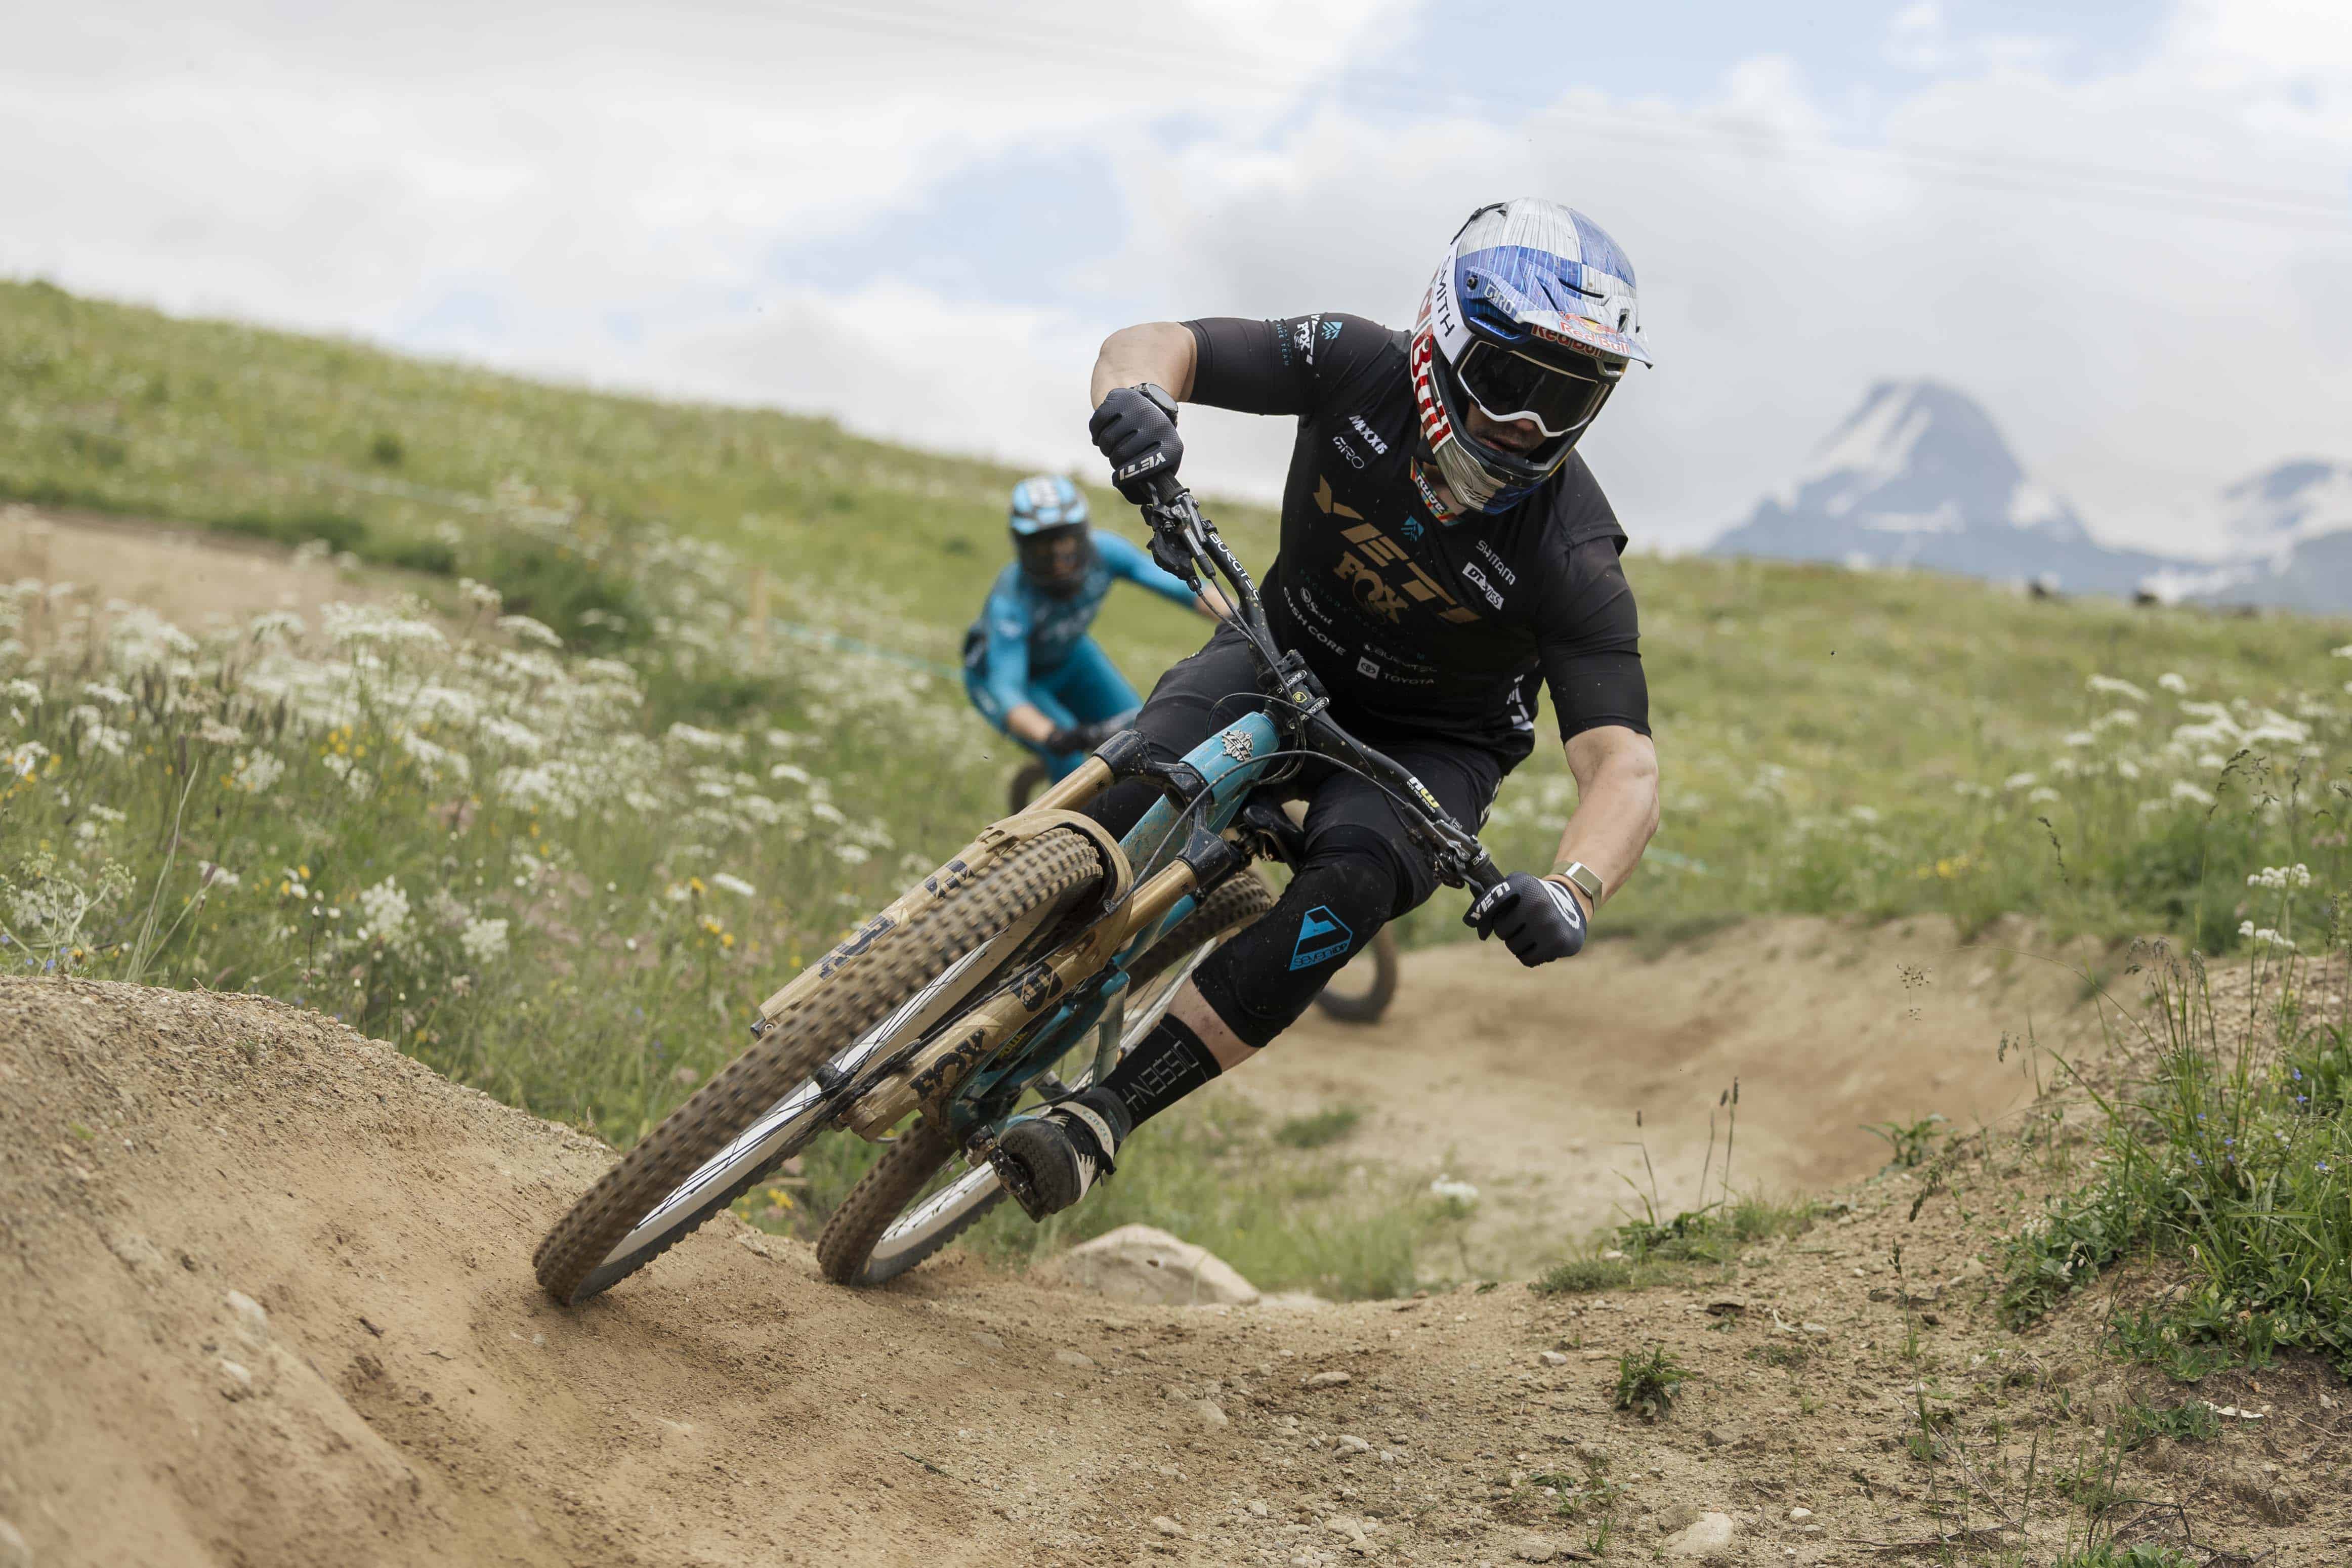 EVERYTHING STILL TO PLAY FOR AT THE PENULTIMATE  UCI ENDURO AND E-ENDURO WORLD CUP ROUNDS OF THE SEASON